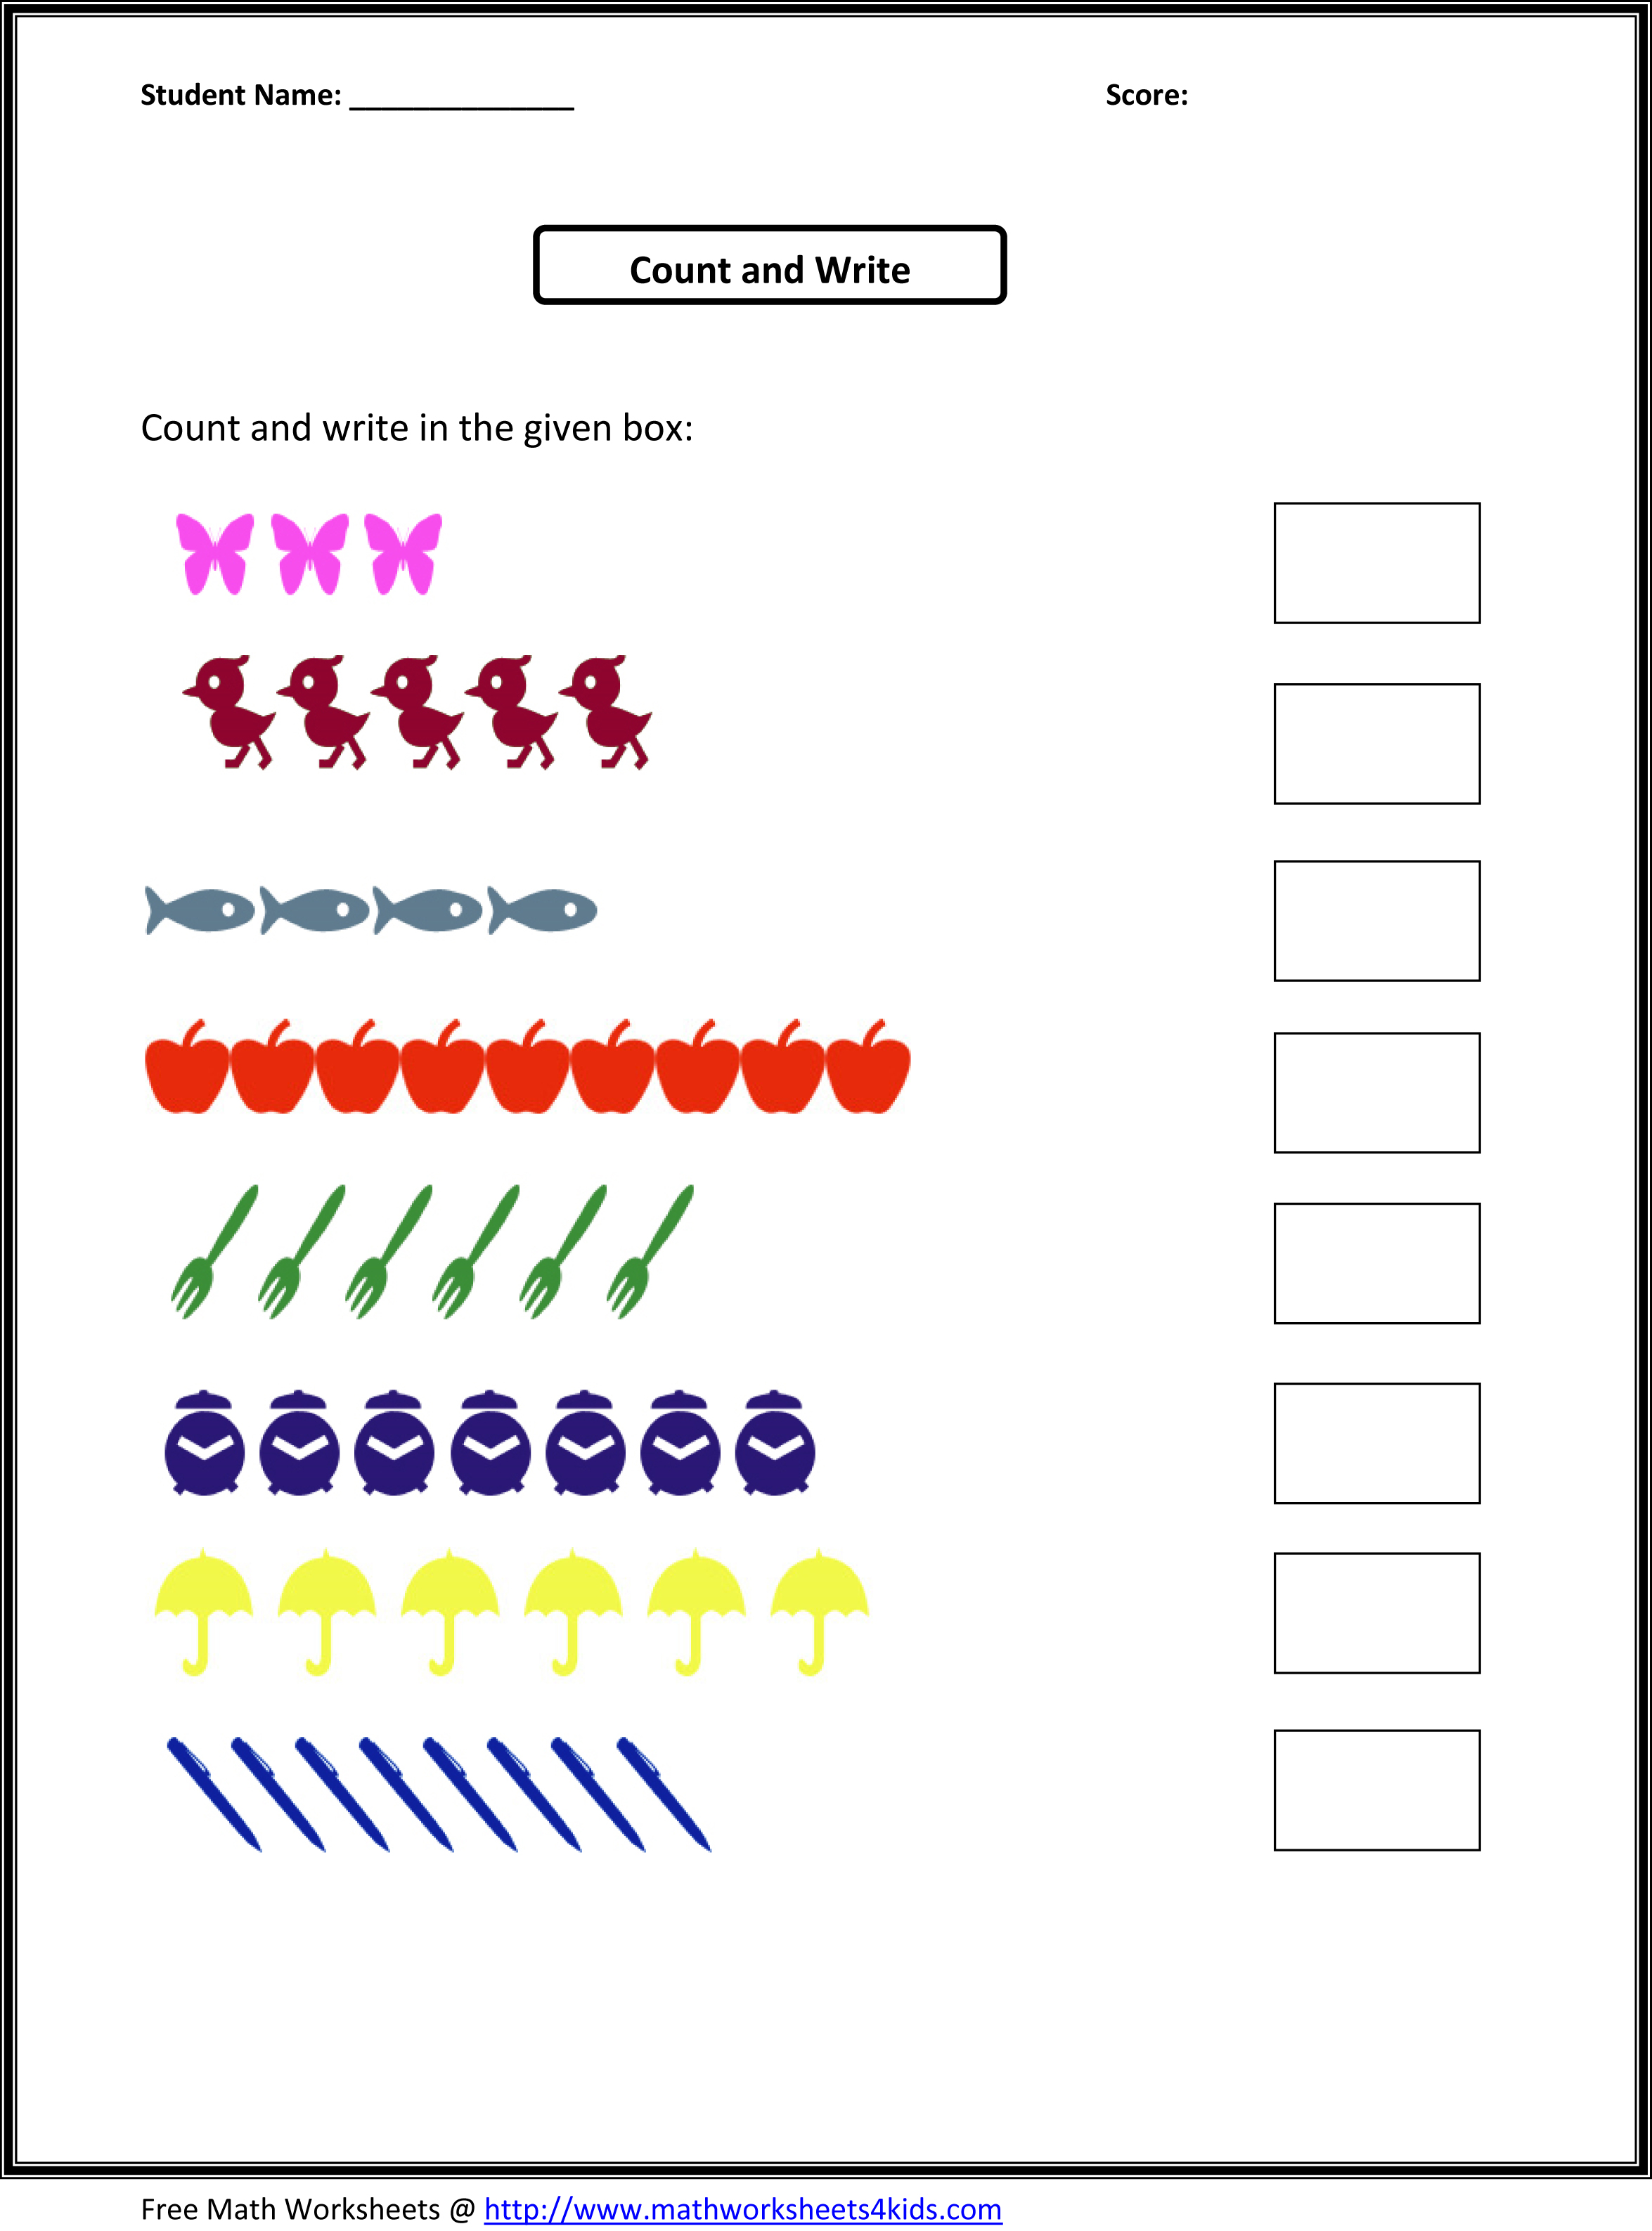 new-398-counting-pictures-worksheets-counting-worksheet